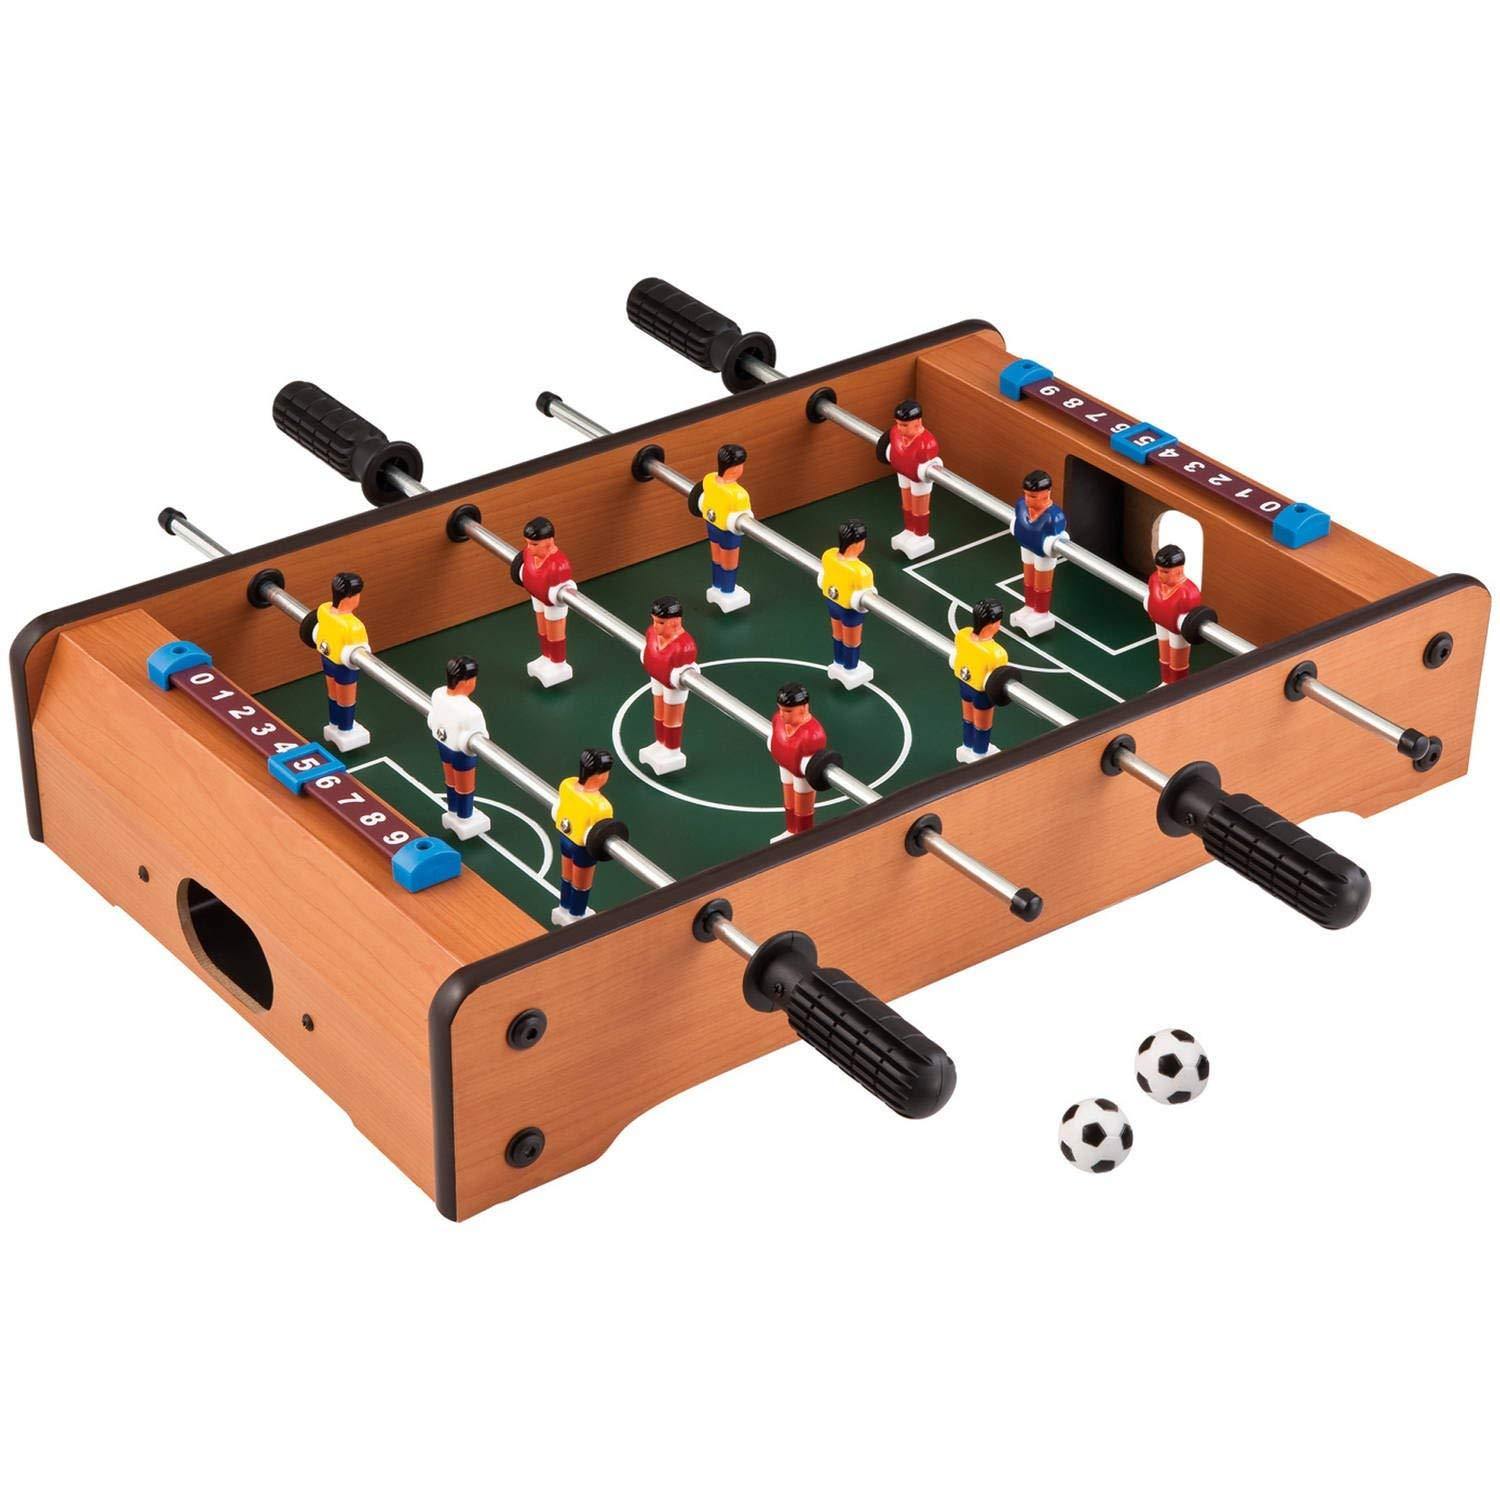 Prokick Mid-Sized Foosball, Mini Football, Table Soccer Game (51 Cms) with 2 Balls, 4 Rods and Score Keeper - Best Price online Prokicksports.com